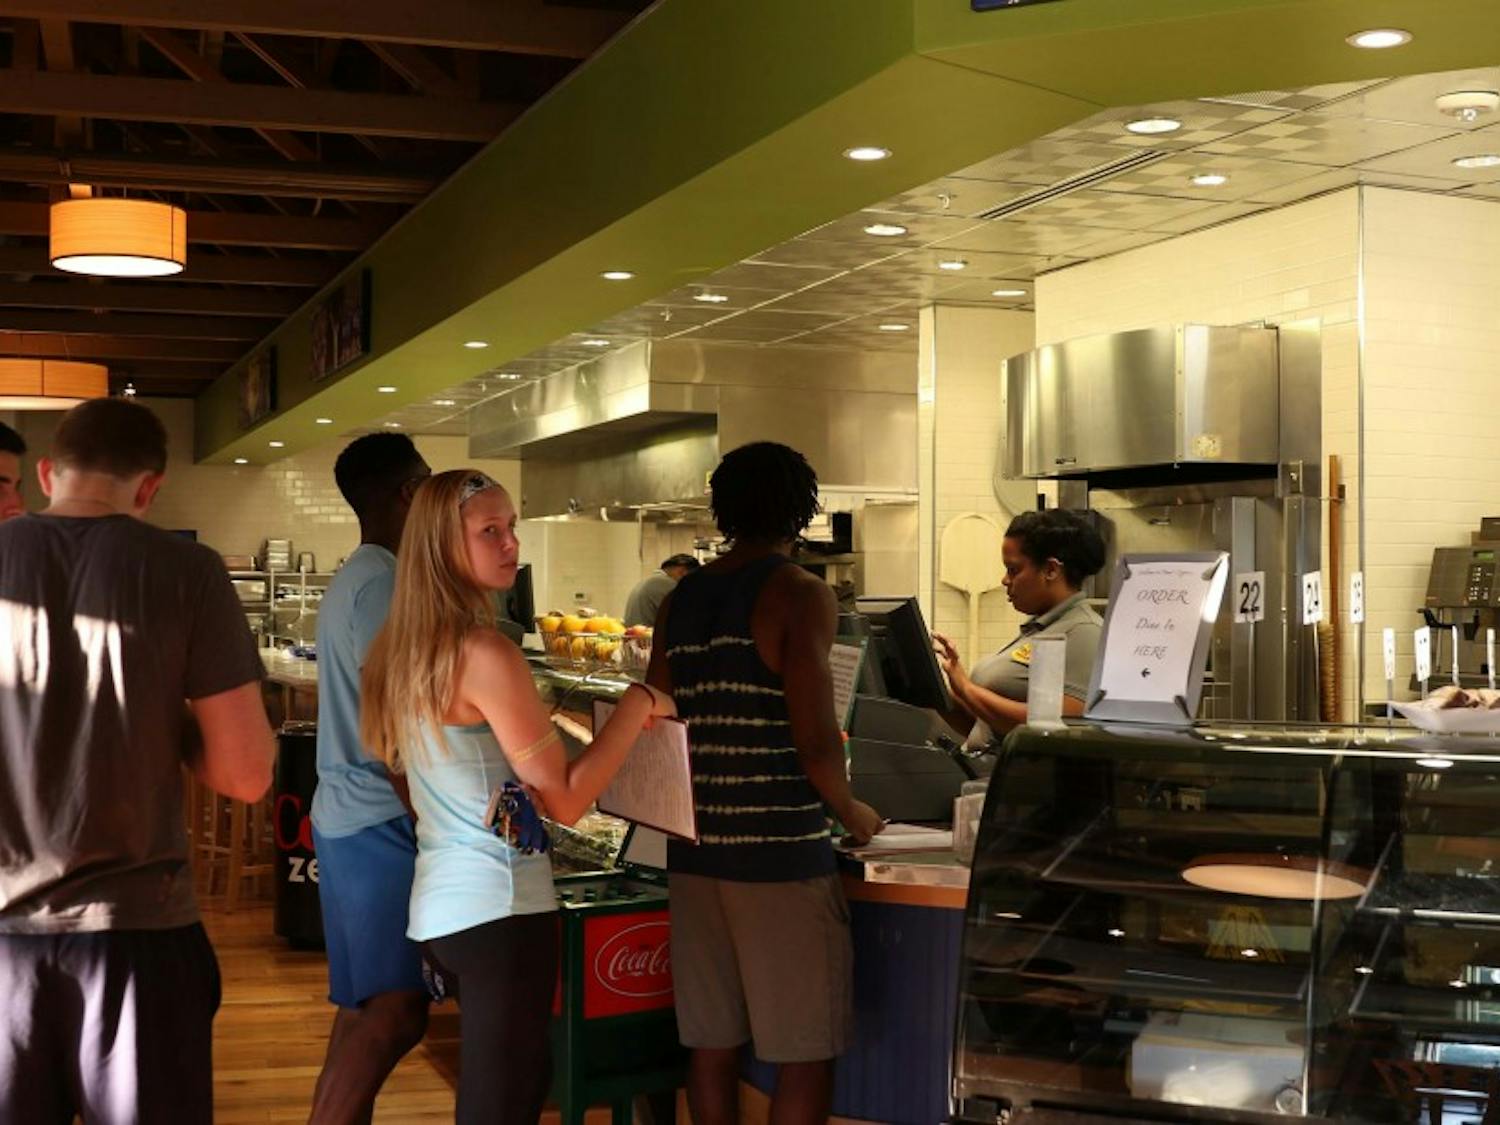 Dame’s Express on Central Campus is hoping to maintain a steady clientele and become one of the most popular on-campus restaurants.